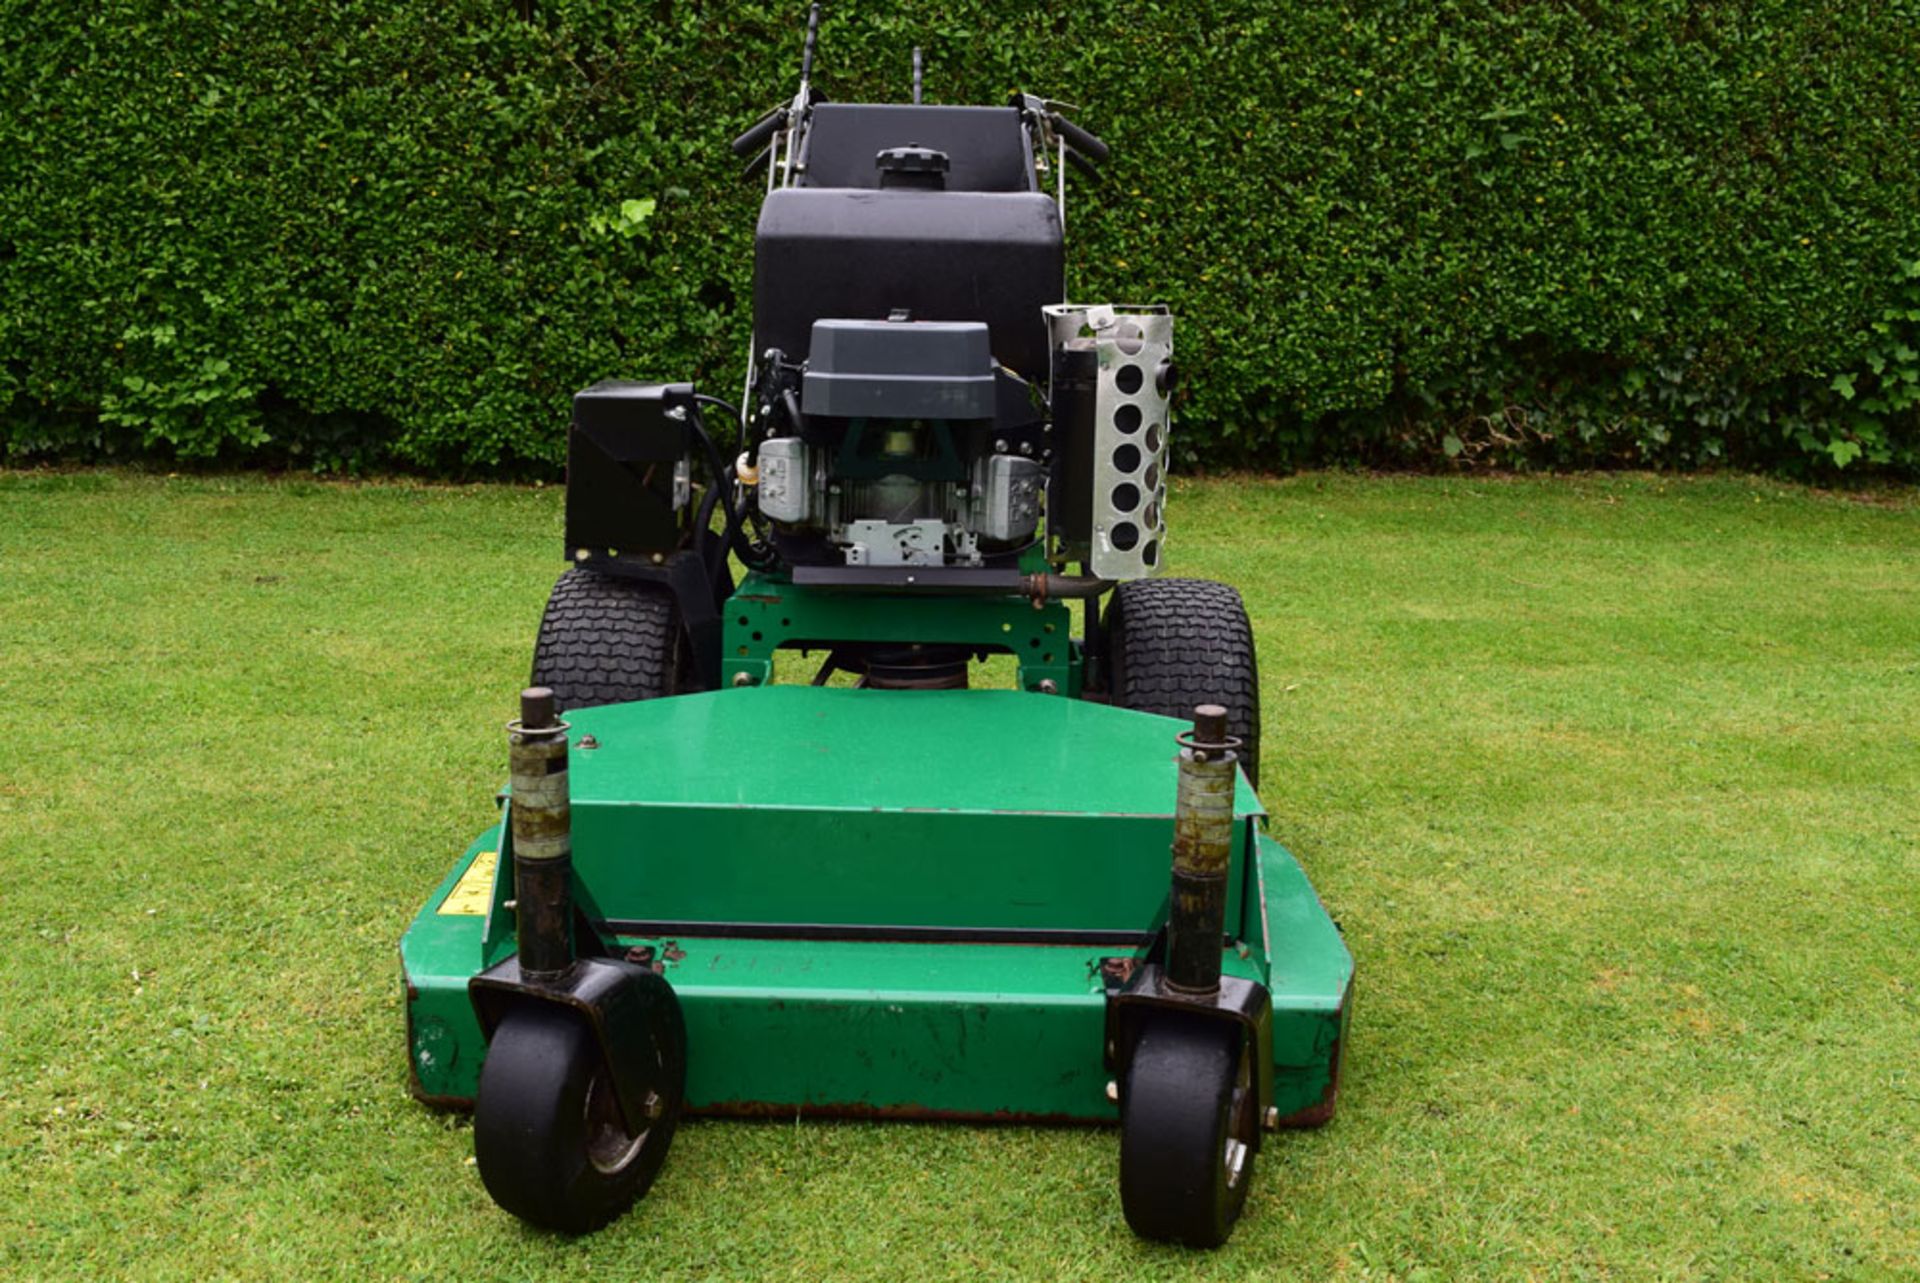 2008 Ransomes Pedestrian 36"""" Commercial Walk Behind Zero Turn Rotary Mower - Image 4 of 9